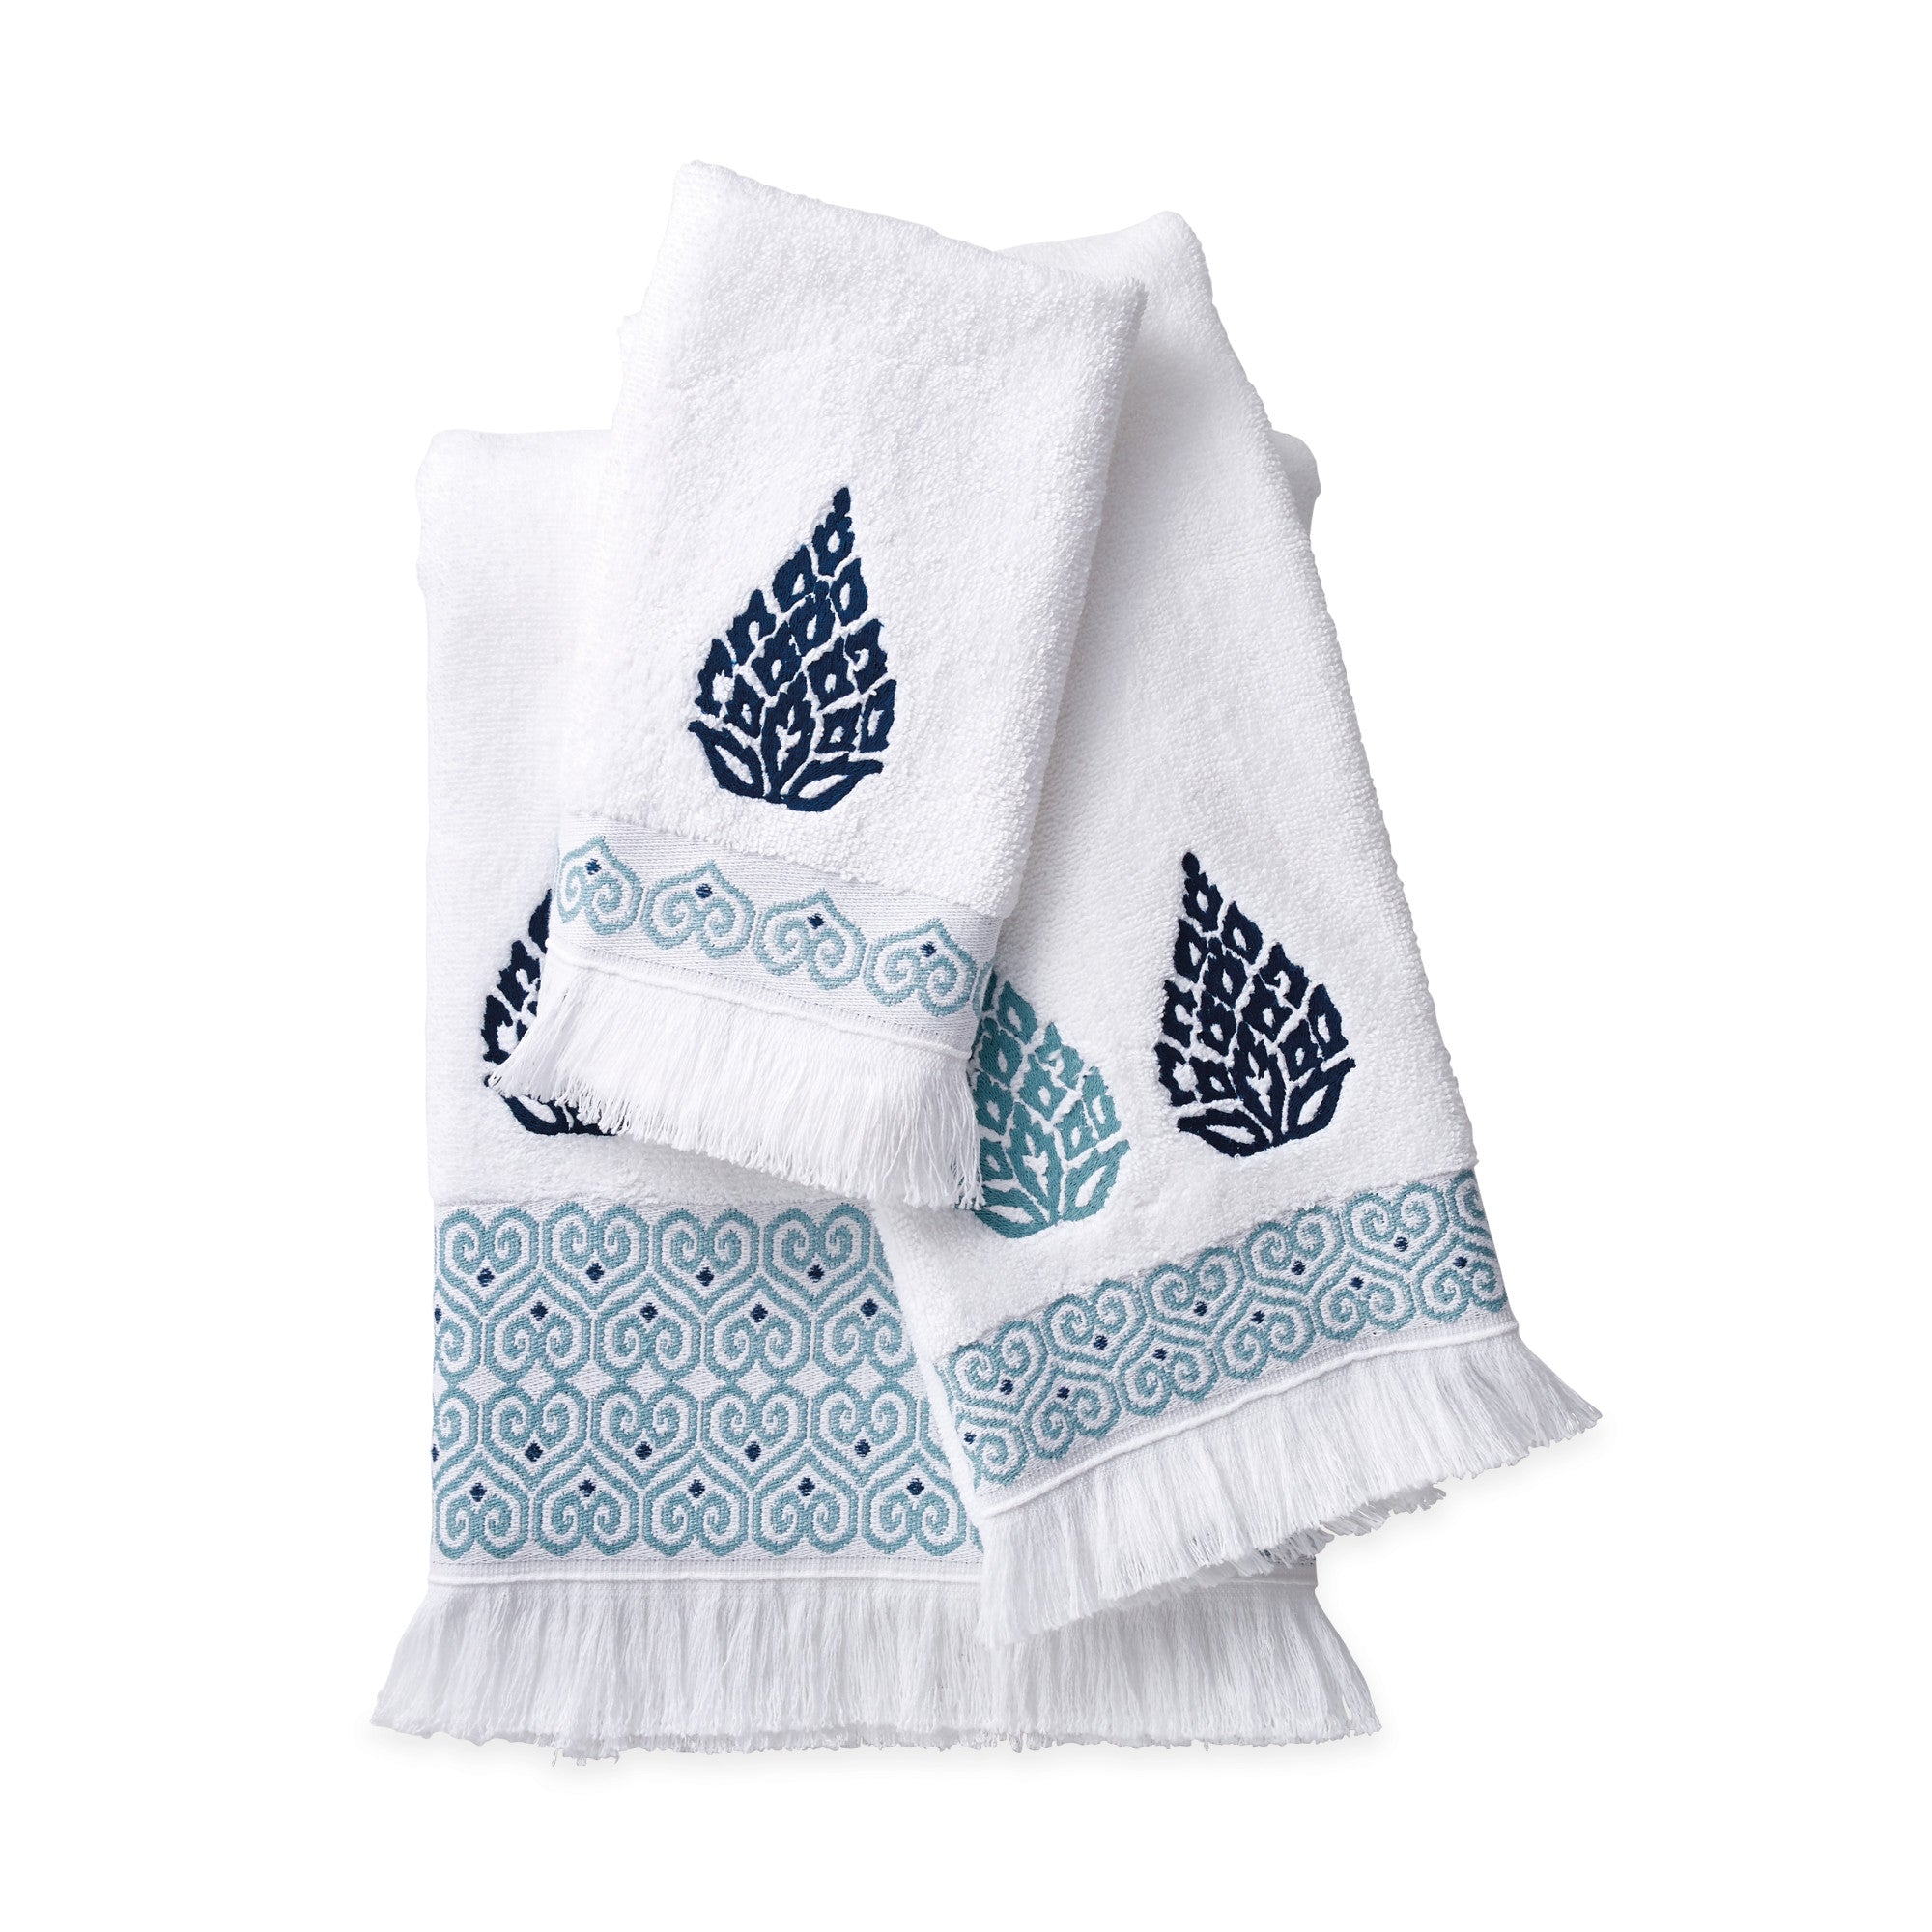 peri homeworks collection towels